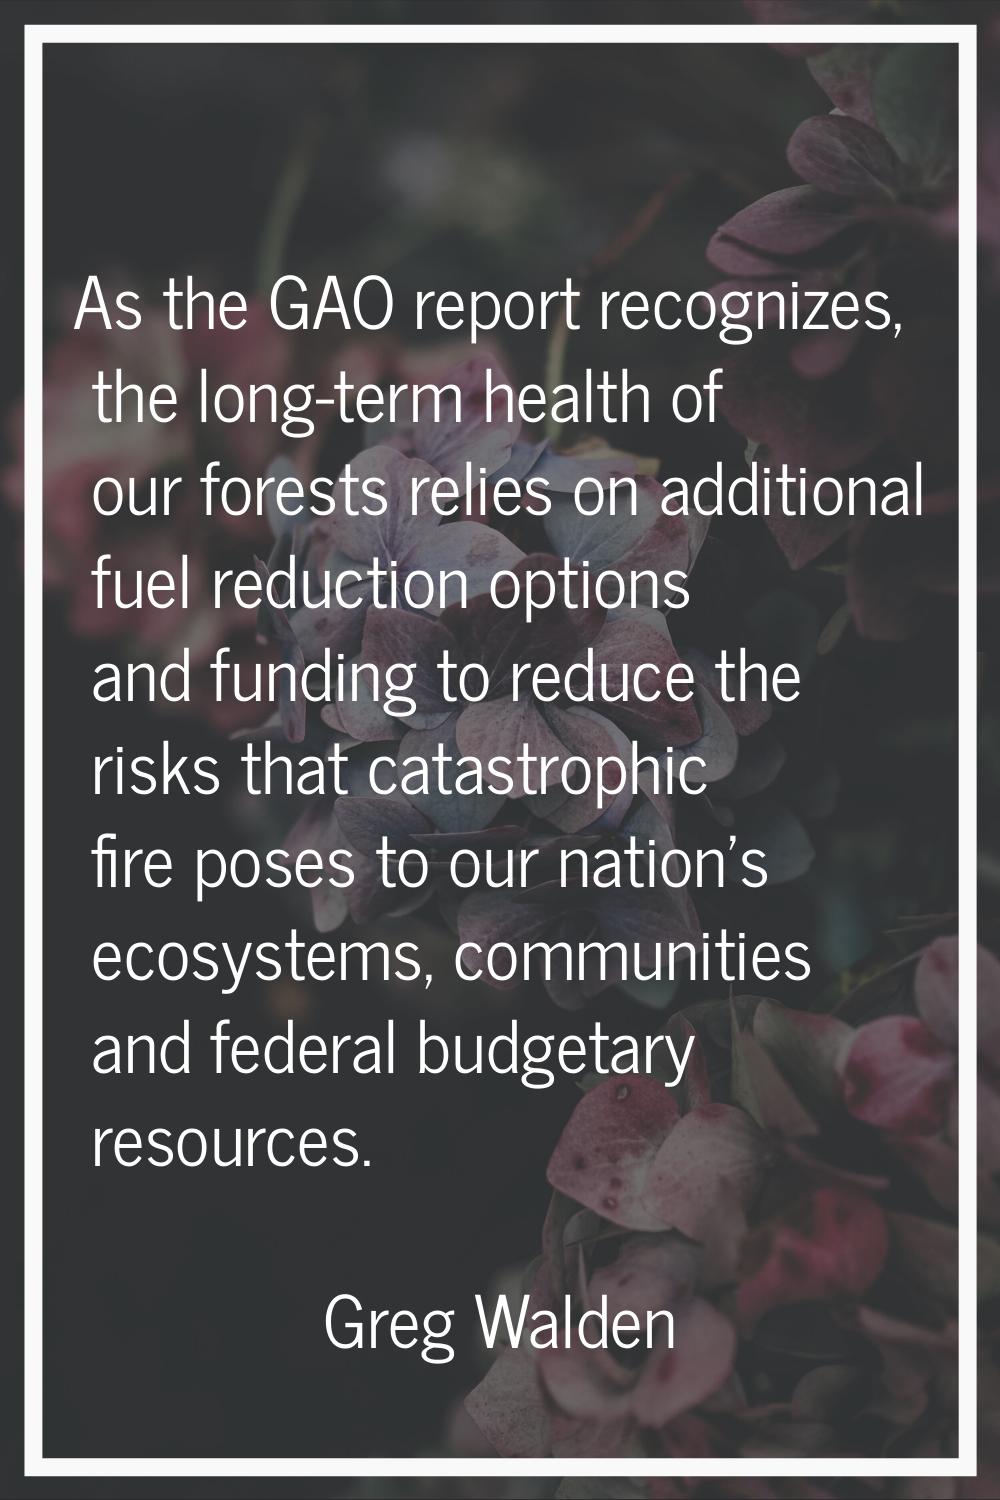 As the GAO report recognizes, the long-term health of our forests relies on additional fuel reducti